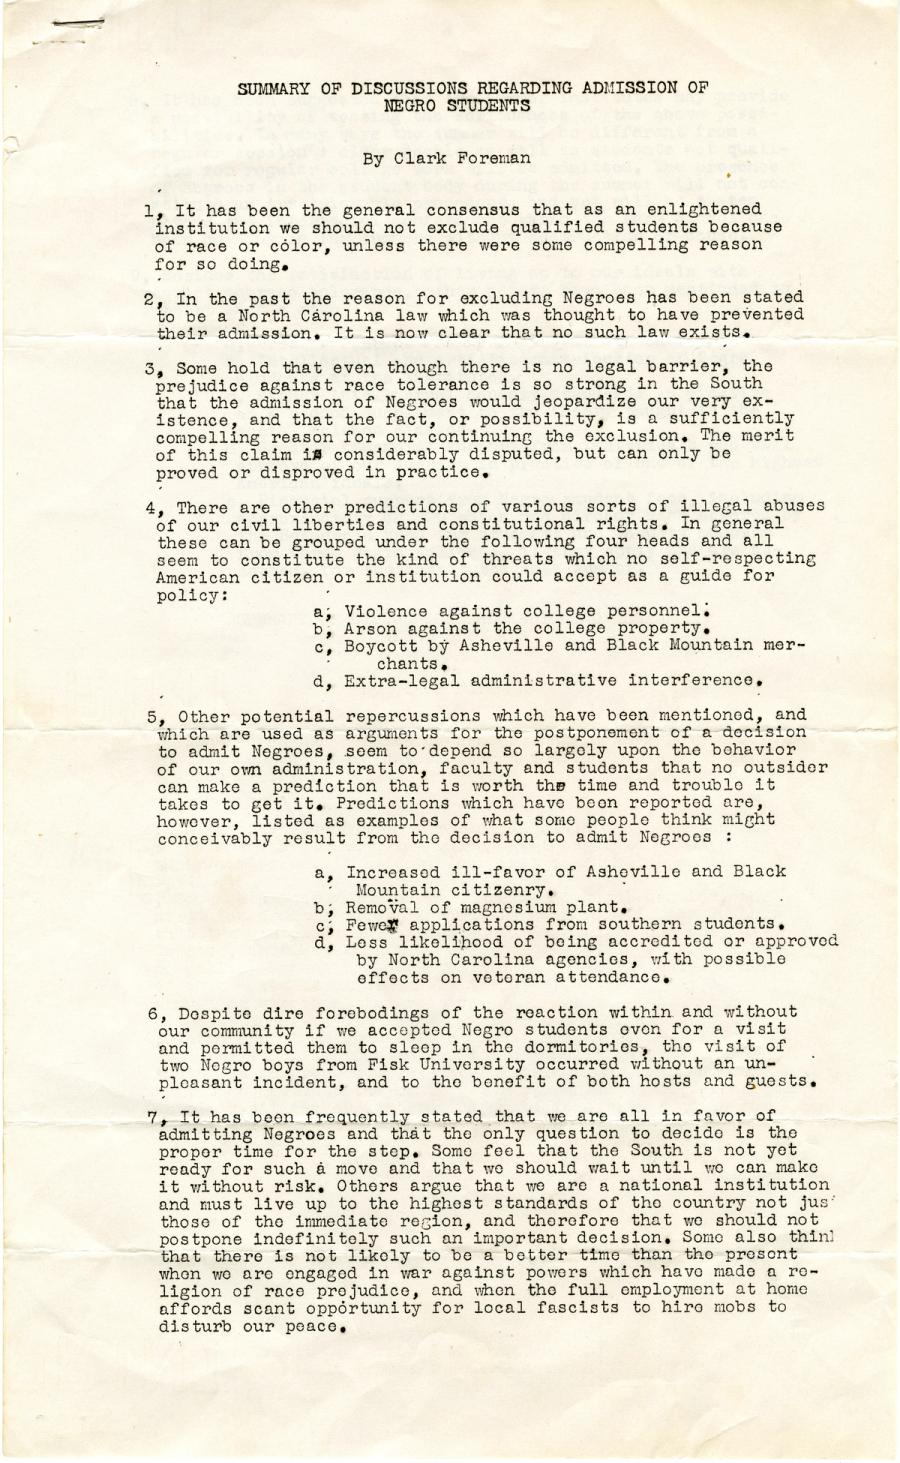 "Summary of Discussions Regarding Admission of Negro Students" written by Clark Foreman, page 1.